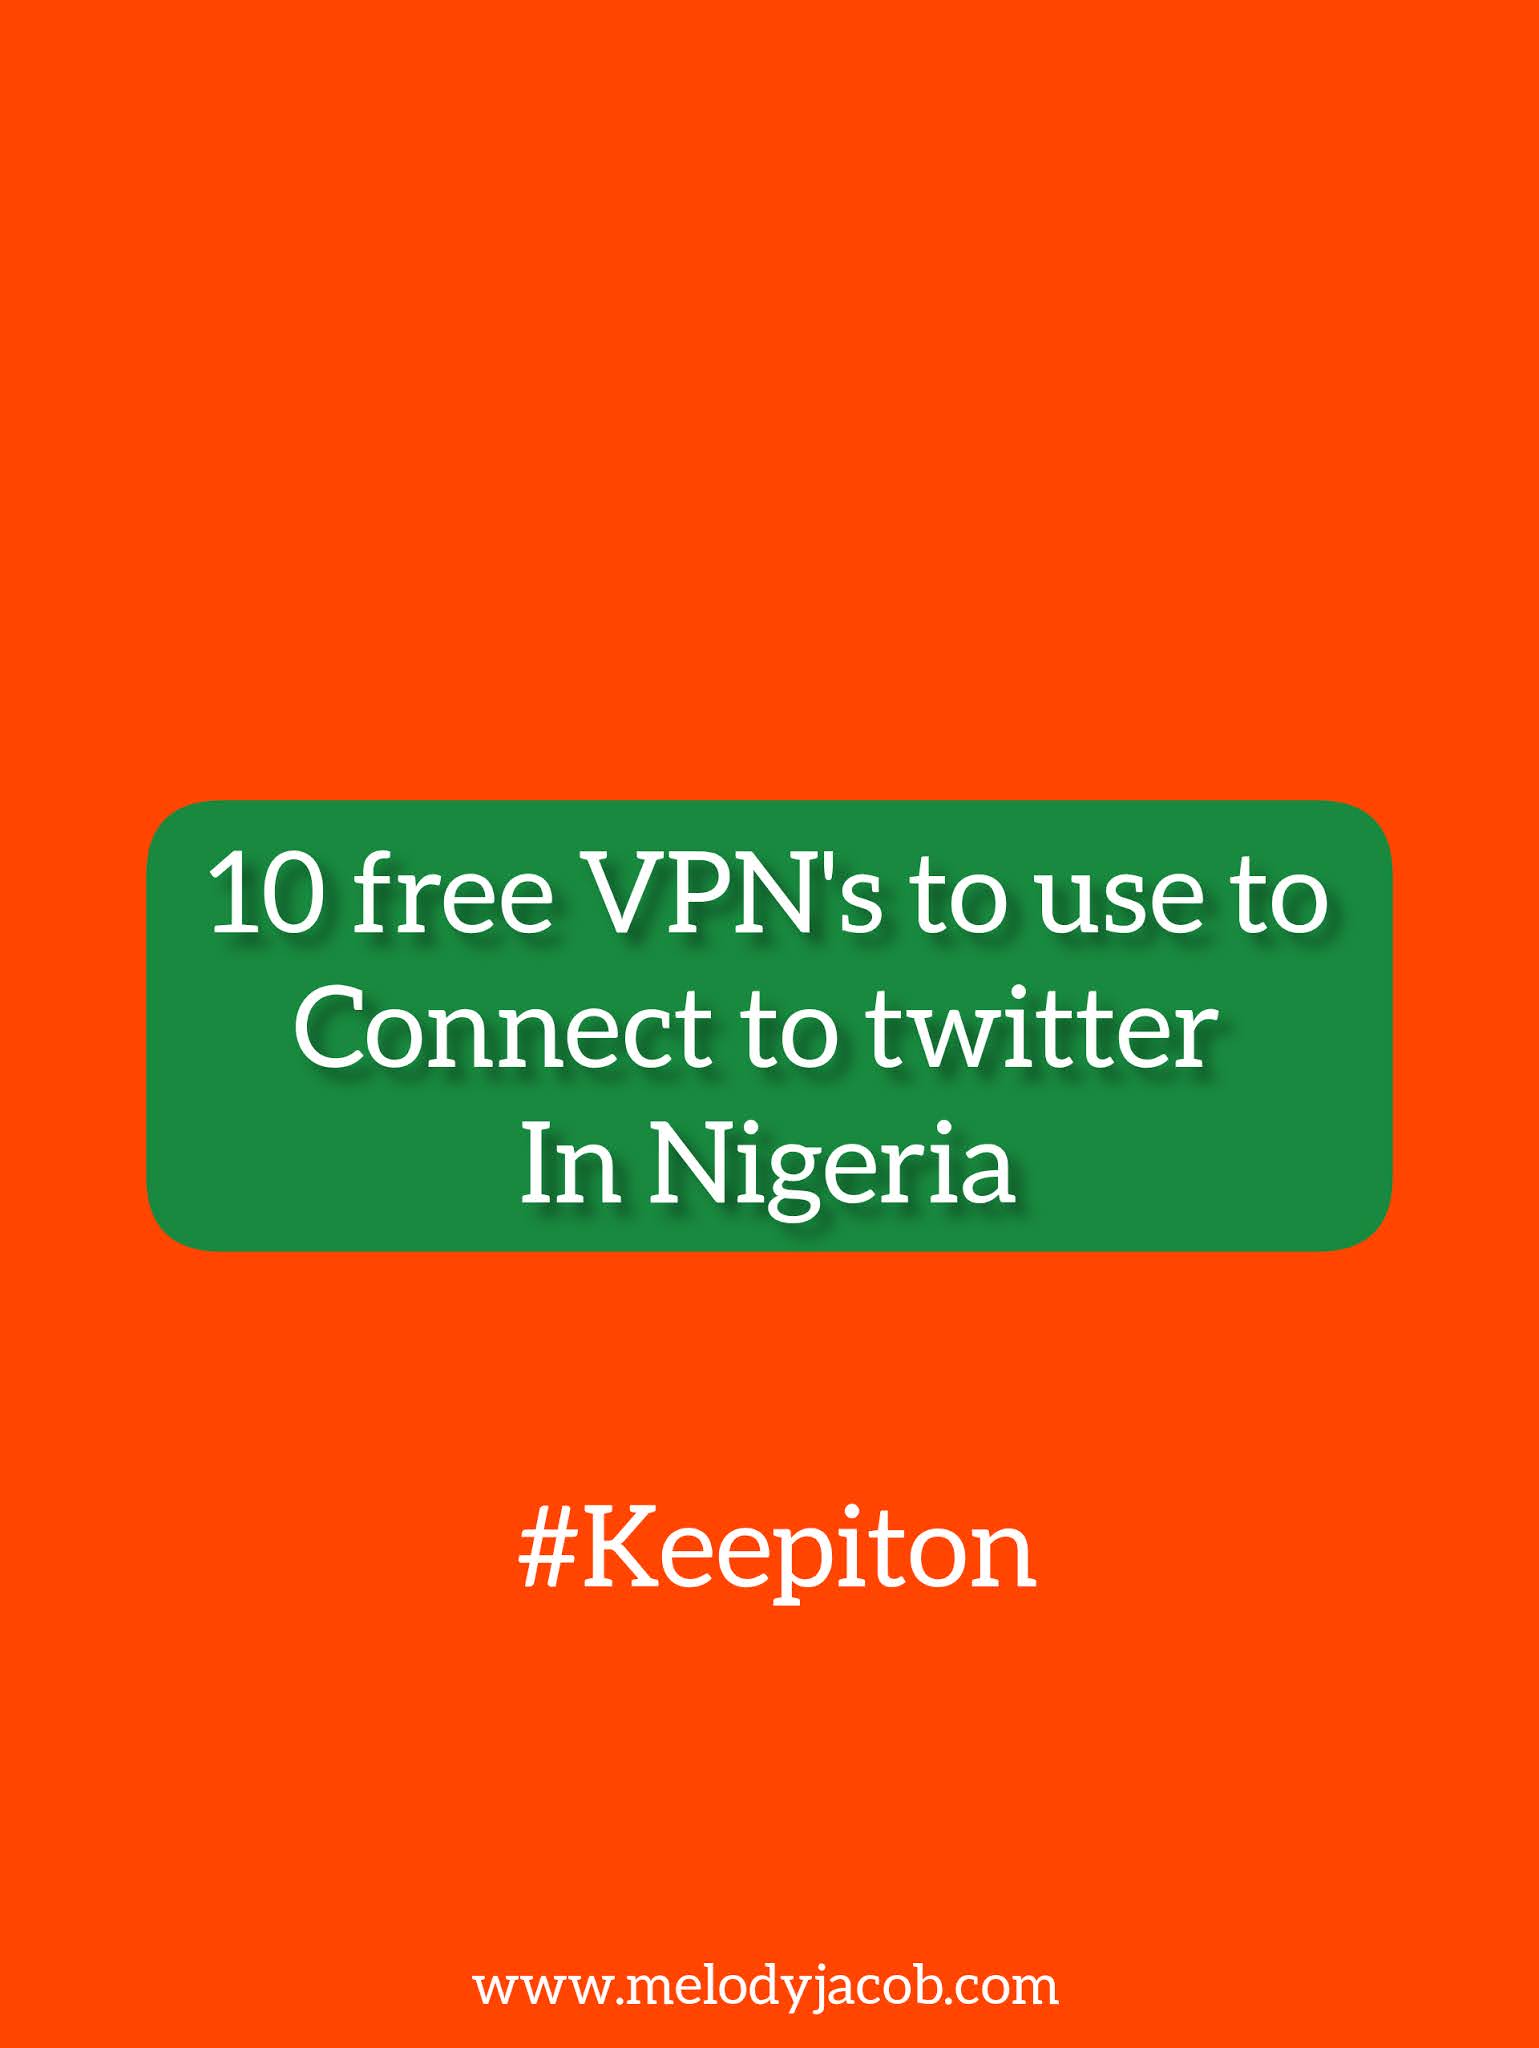 The best Top 10 free VPN to use to connect to Twitter in Nigeria now